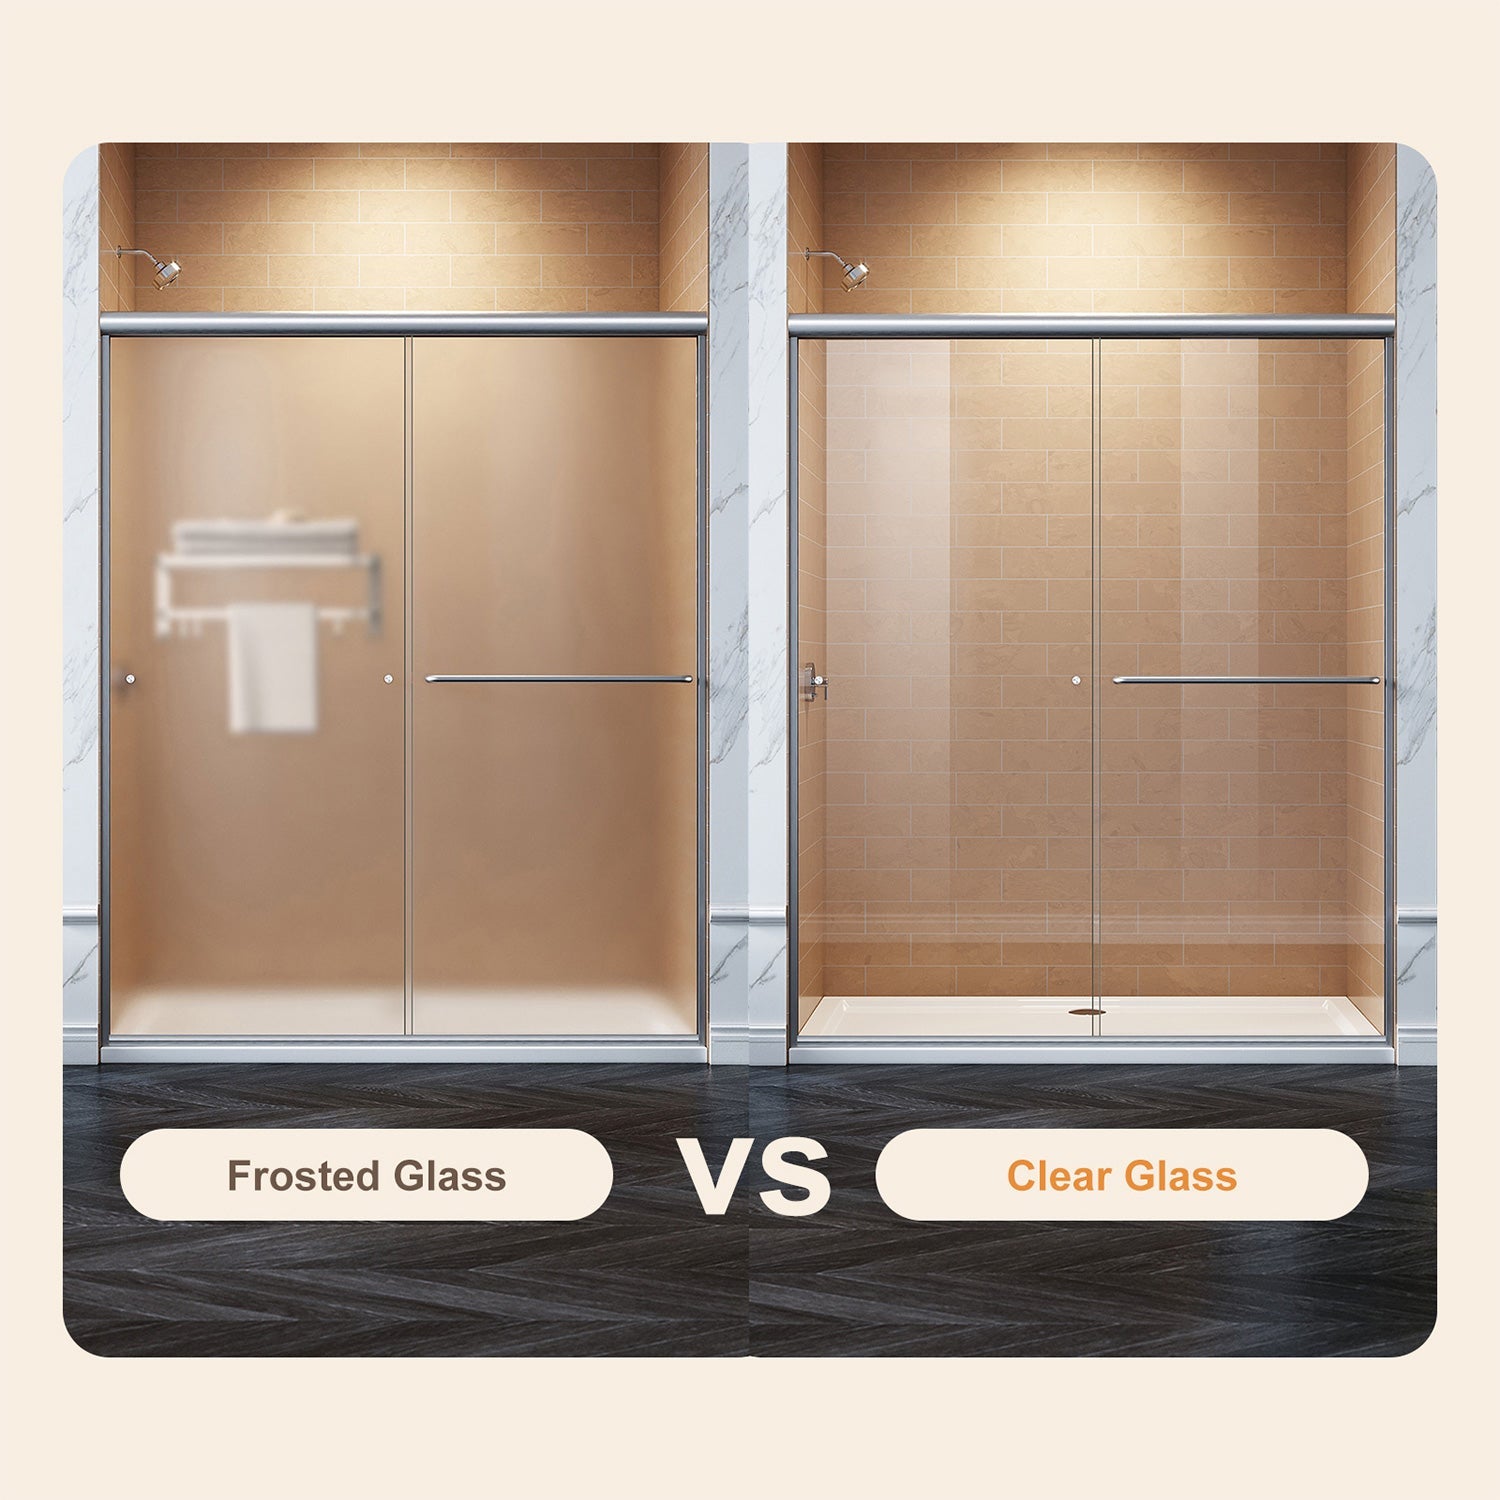  Both two glass panels can slide from "right" or "left", with the door handle and knobs, convenient to go in/out.